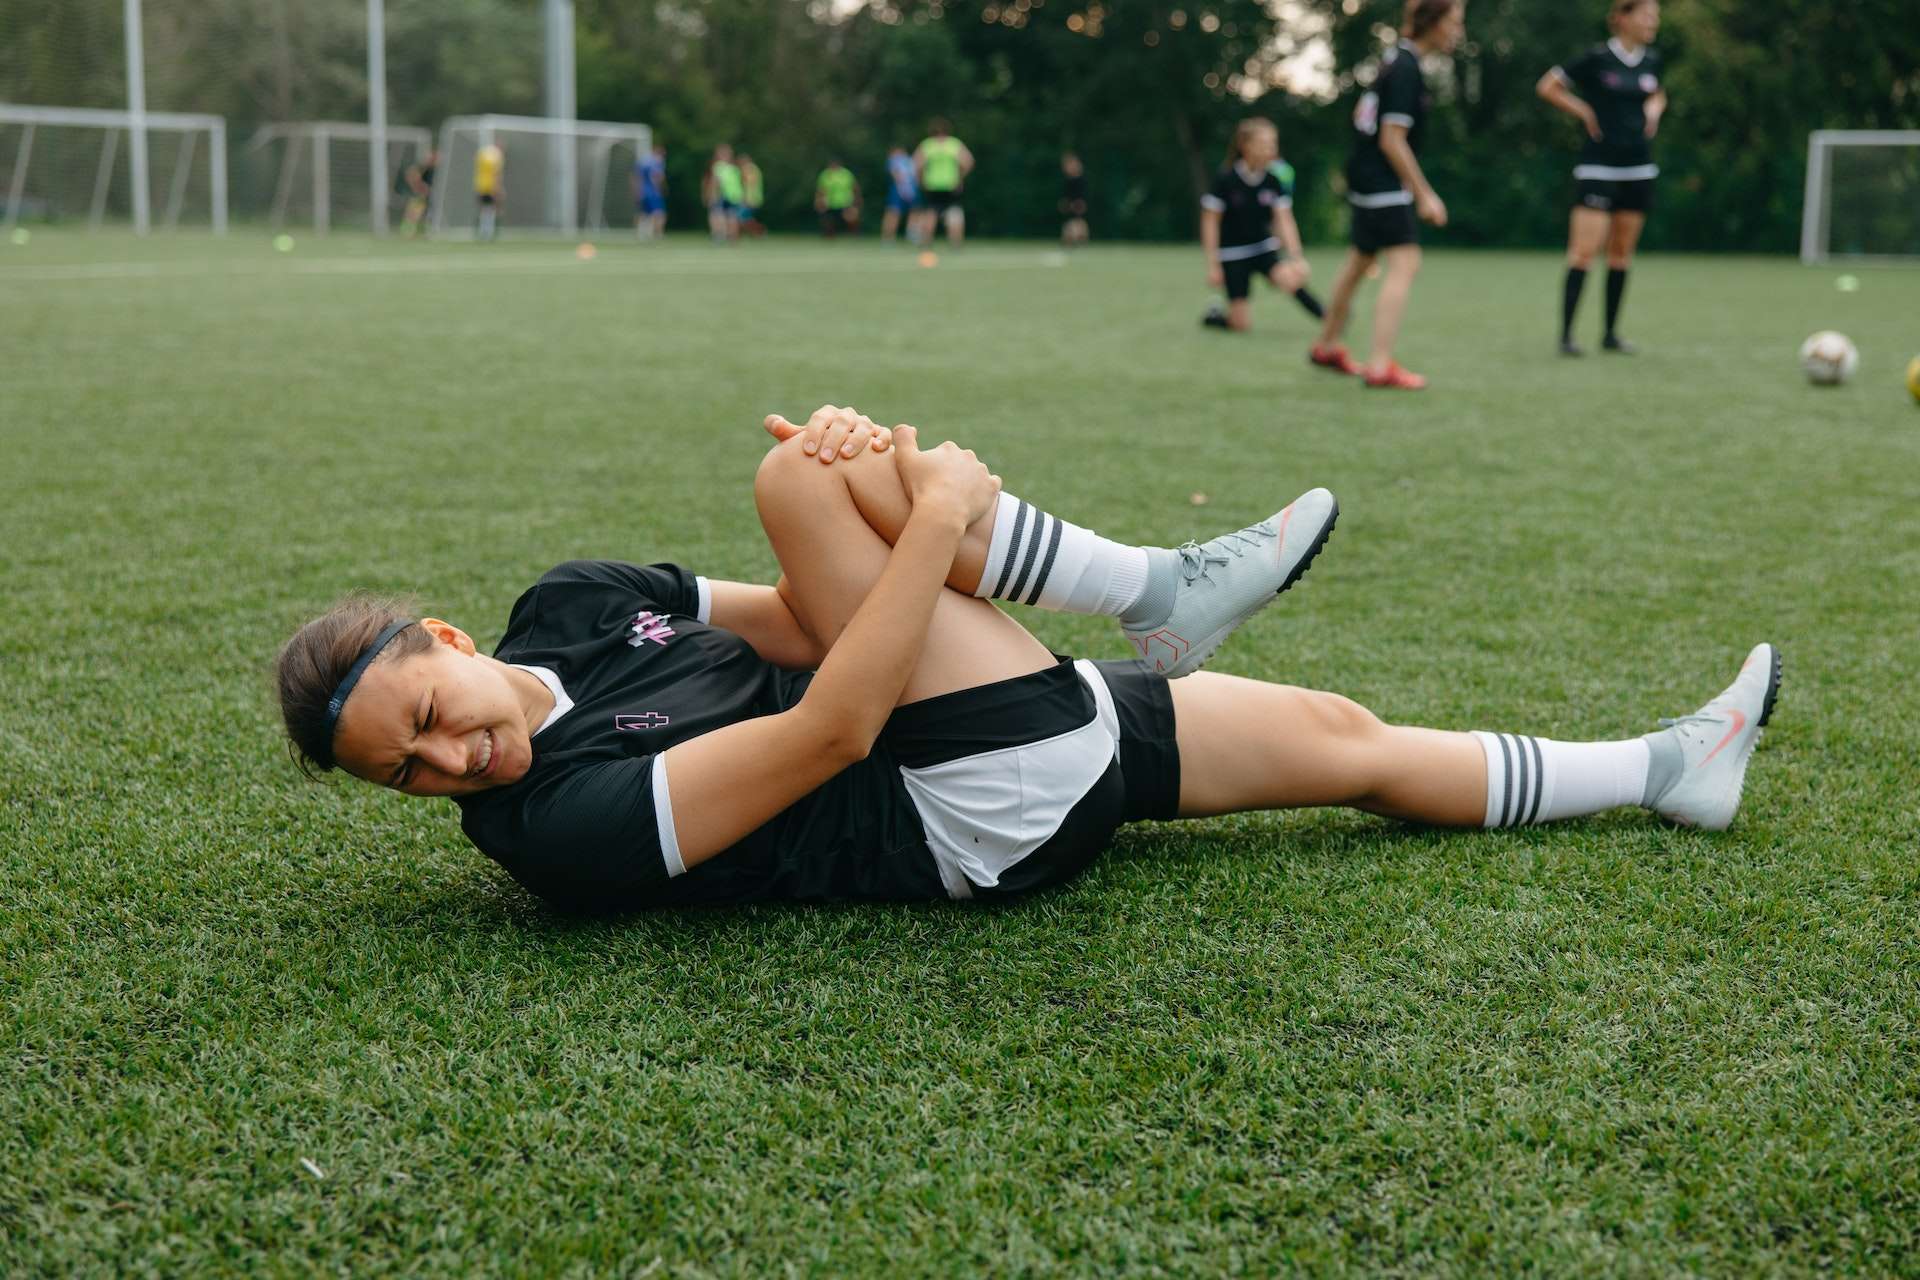 Injured Athlete Lying on a Soccer Field 